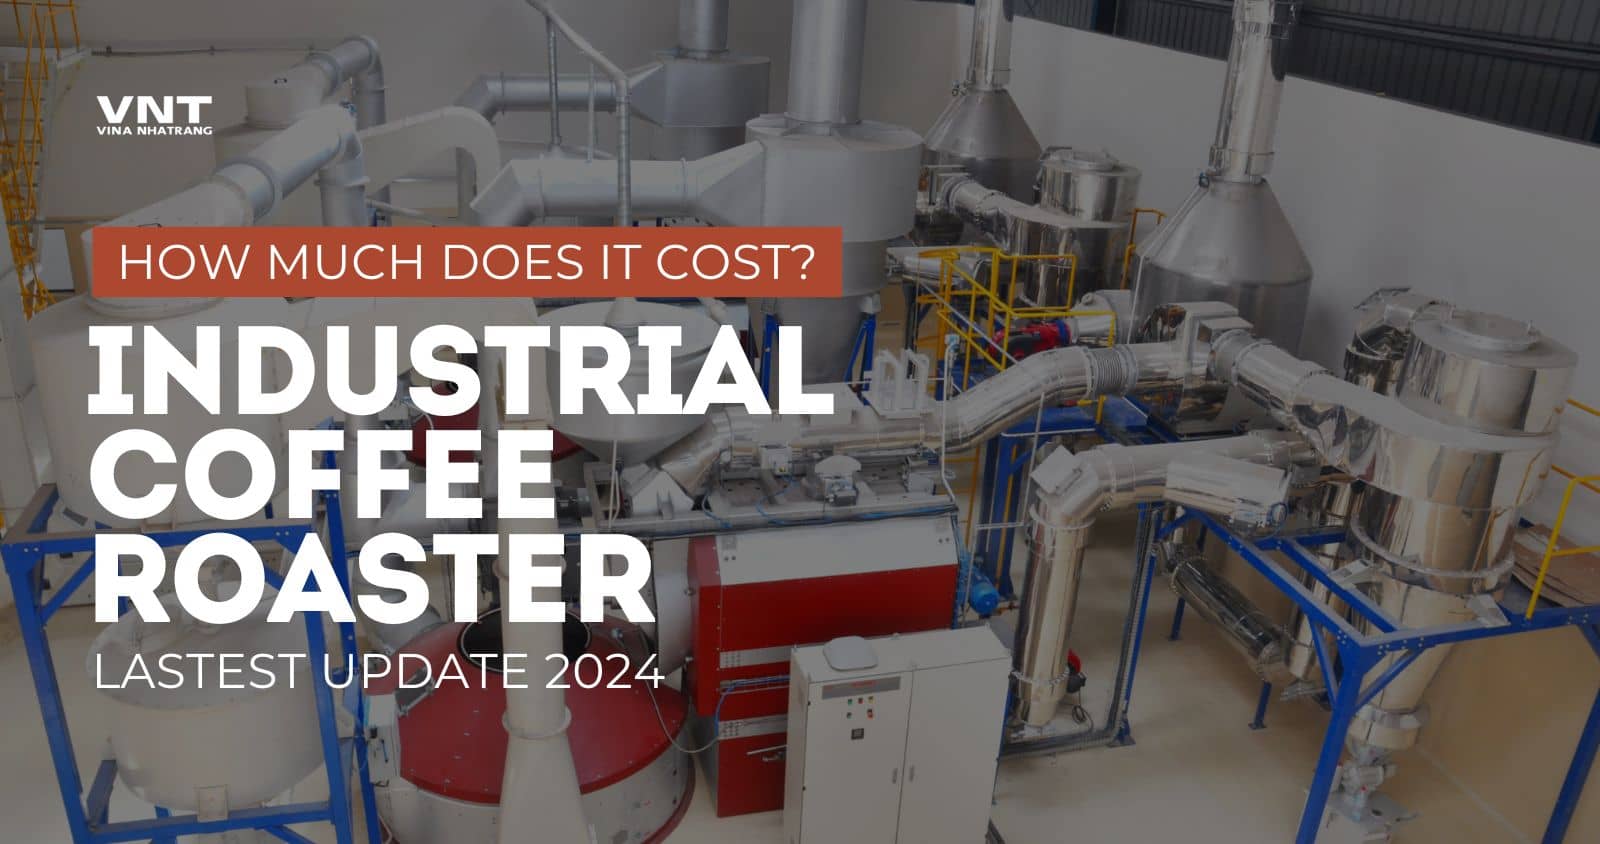 How much does a Industrial Coffee Roaster cost?